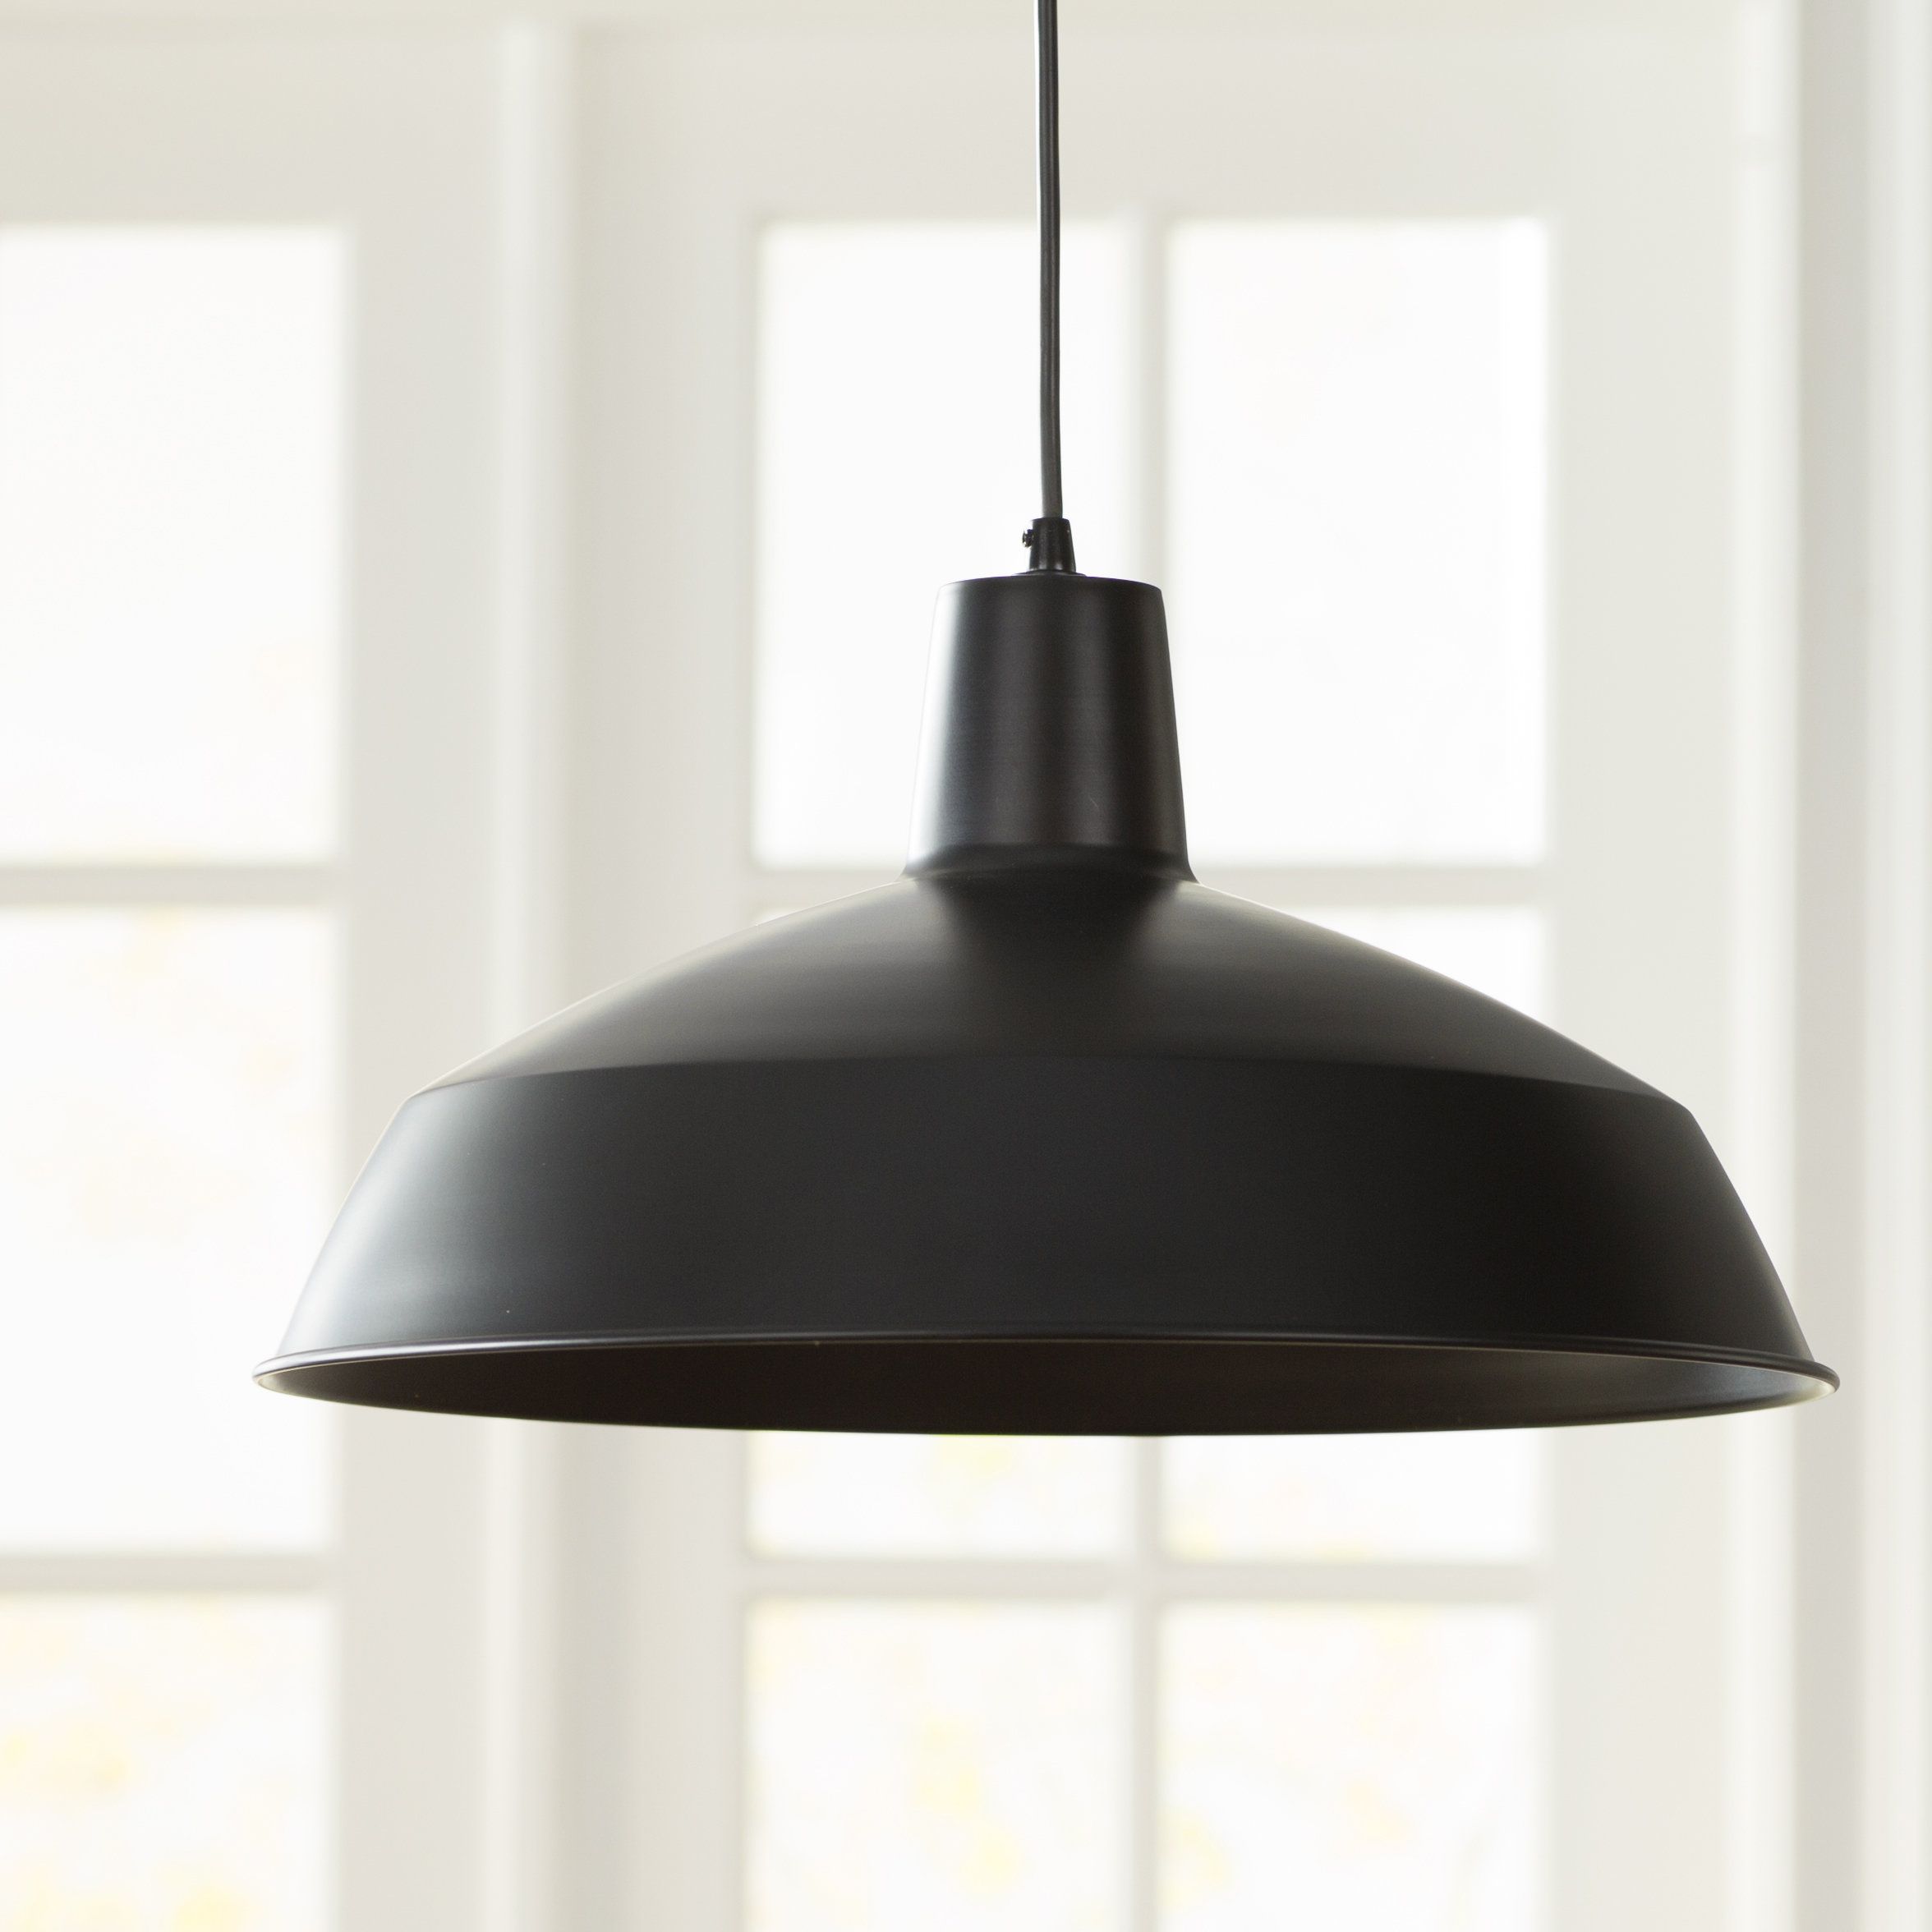 Well Liked Southlake 1 Light Single Dome Pendants Throughout Adrianna 1 Light Single Dome Pendant (View 9 of 20)